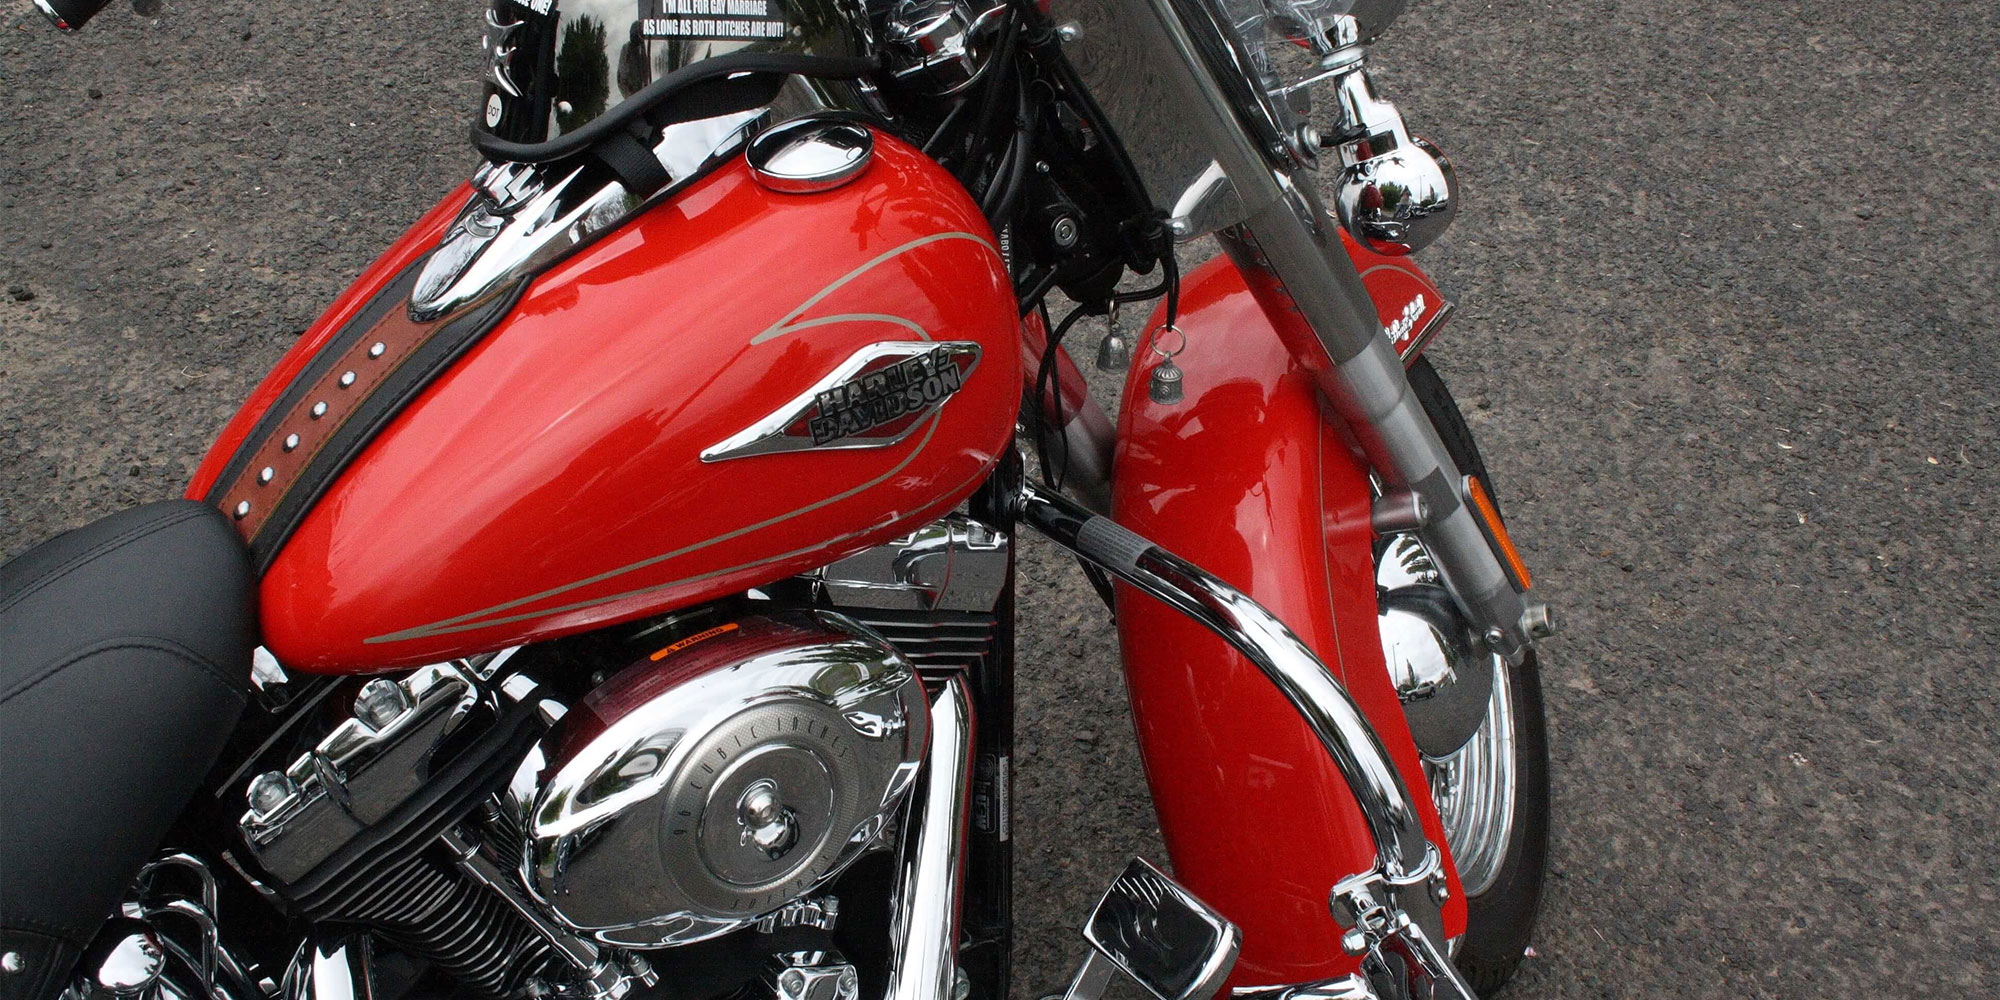 A clean and shiny motorcycle showing its brilliant red tank and fender